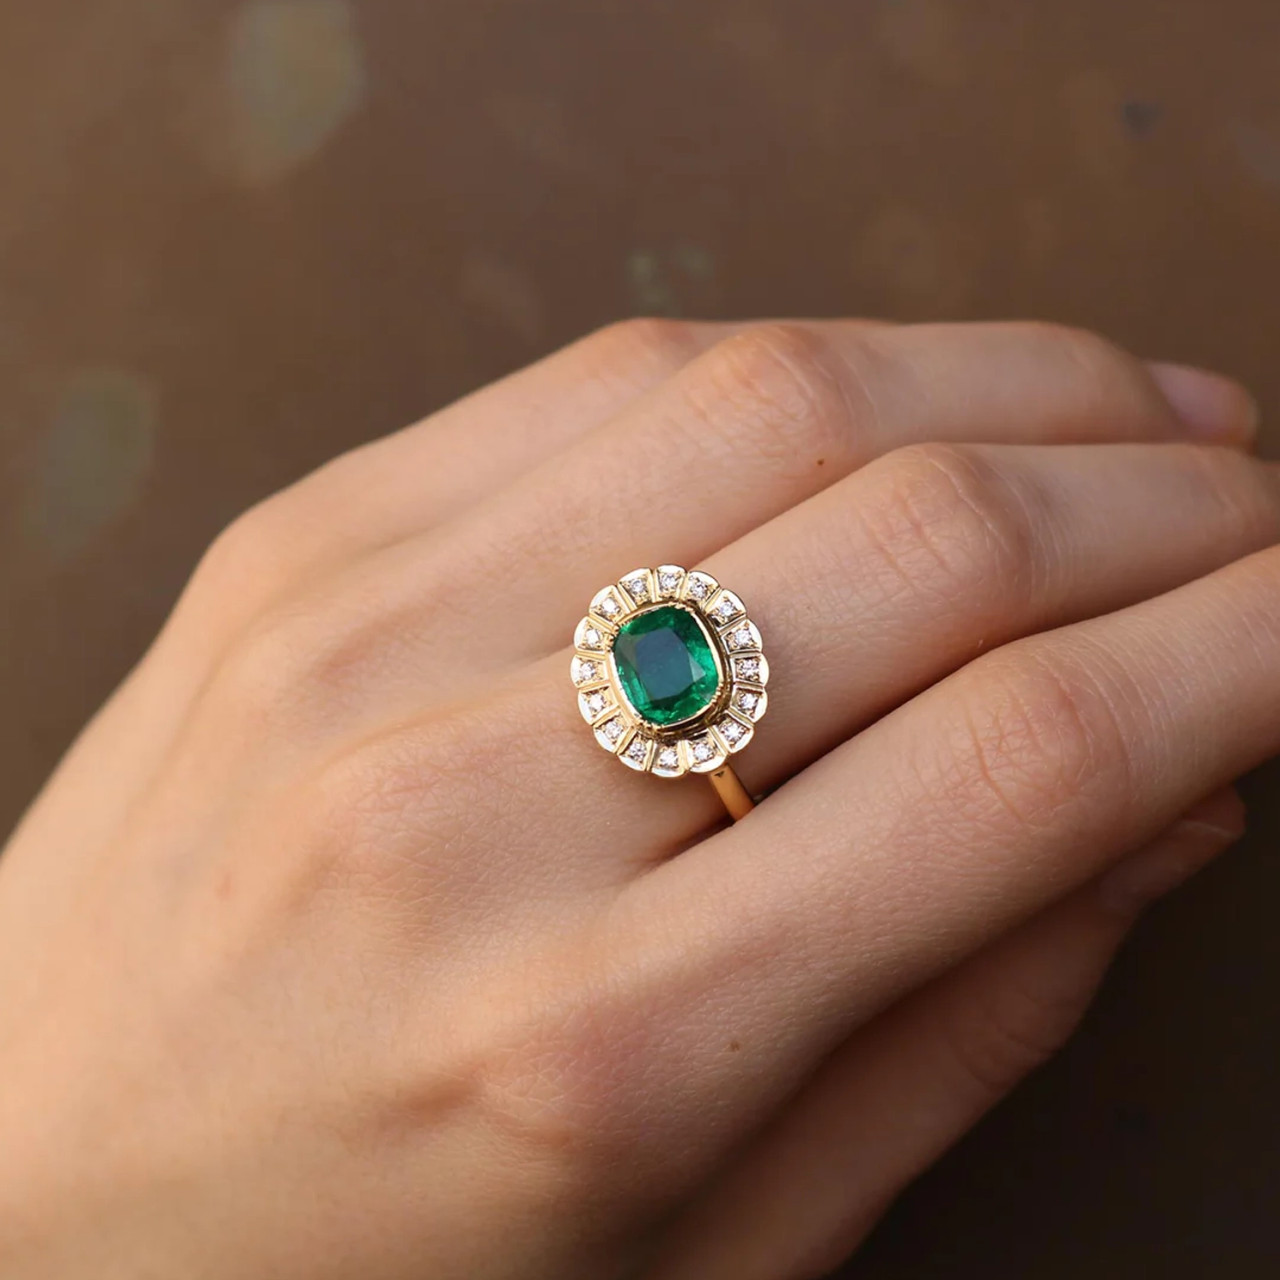 One-Of-A-Kind Emerald Diamond Crown Ring, Brooke Gregson, tomfoolery